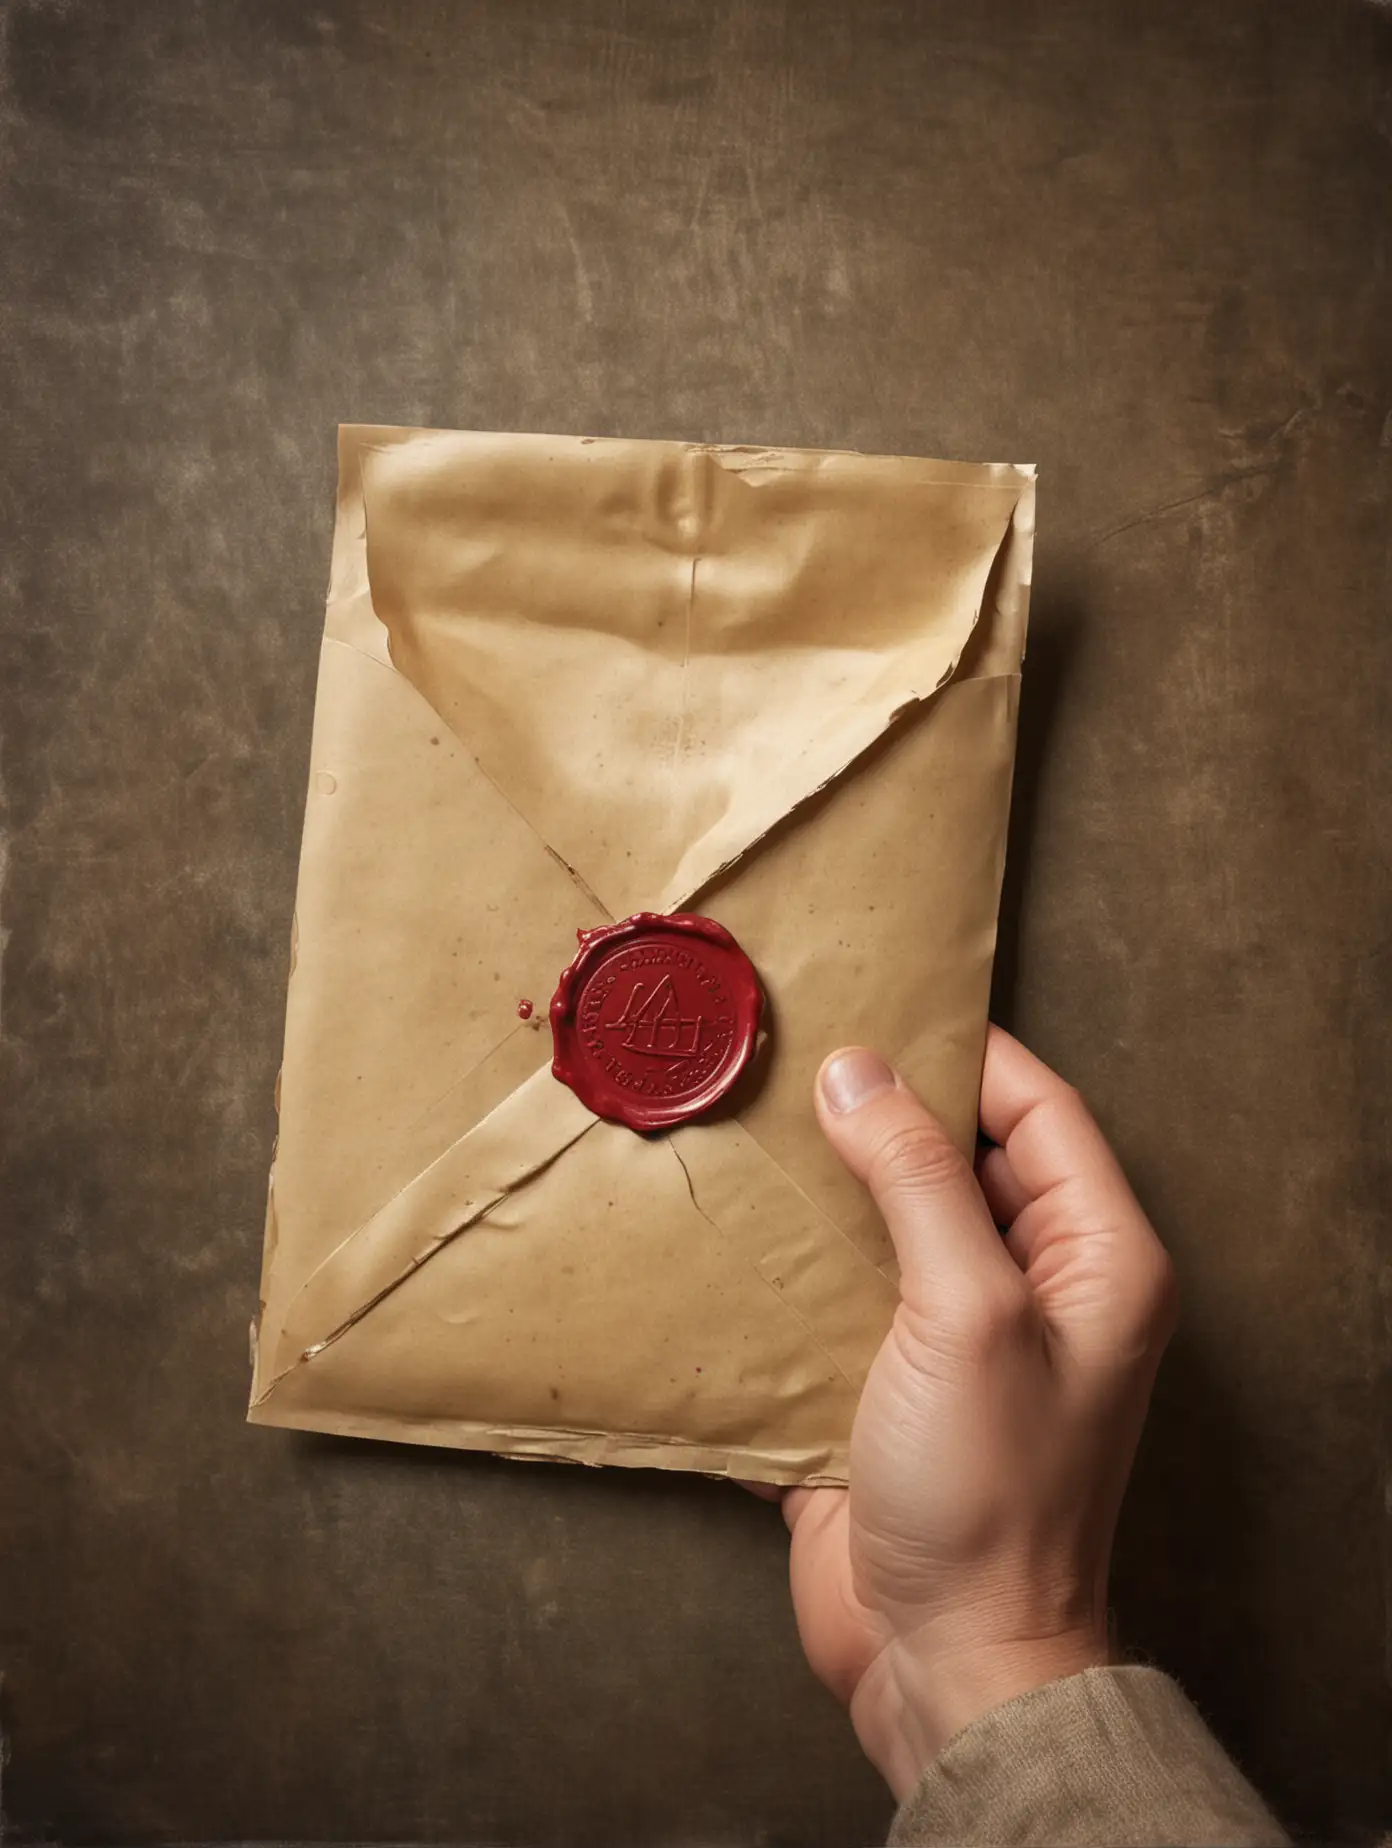  wax-sealed envelope in hand. ebook chapter art.
  

